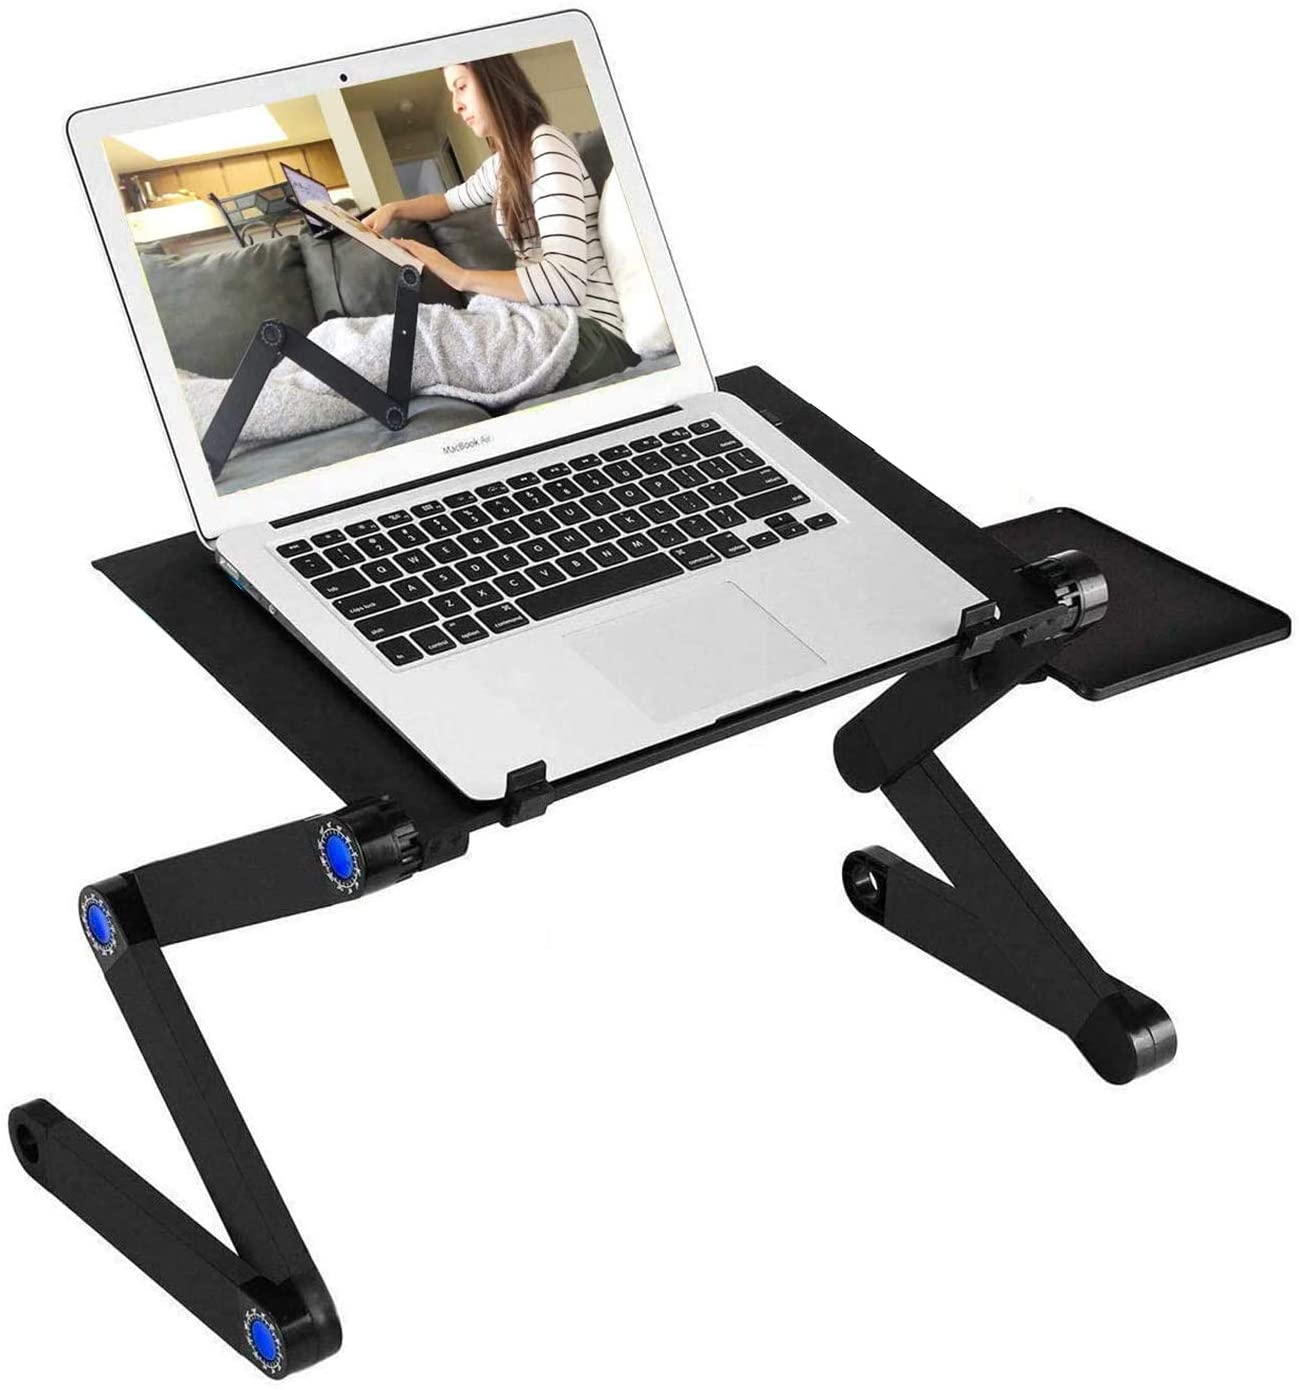 Adjustable Laptop Stand, RAINBEAN Laptop Desk with 2 CPU Cooling USB Fans for Bed Aluminum Lap Workstation Desk with Mouse Pad, Foldable Cook Book Stand Notebook Holder Sofa